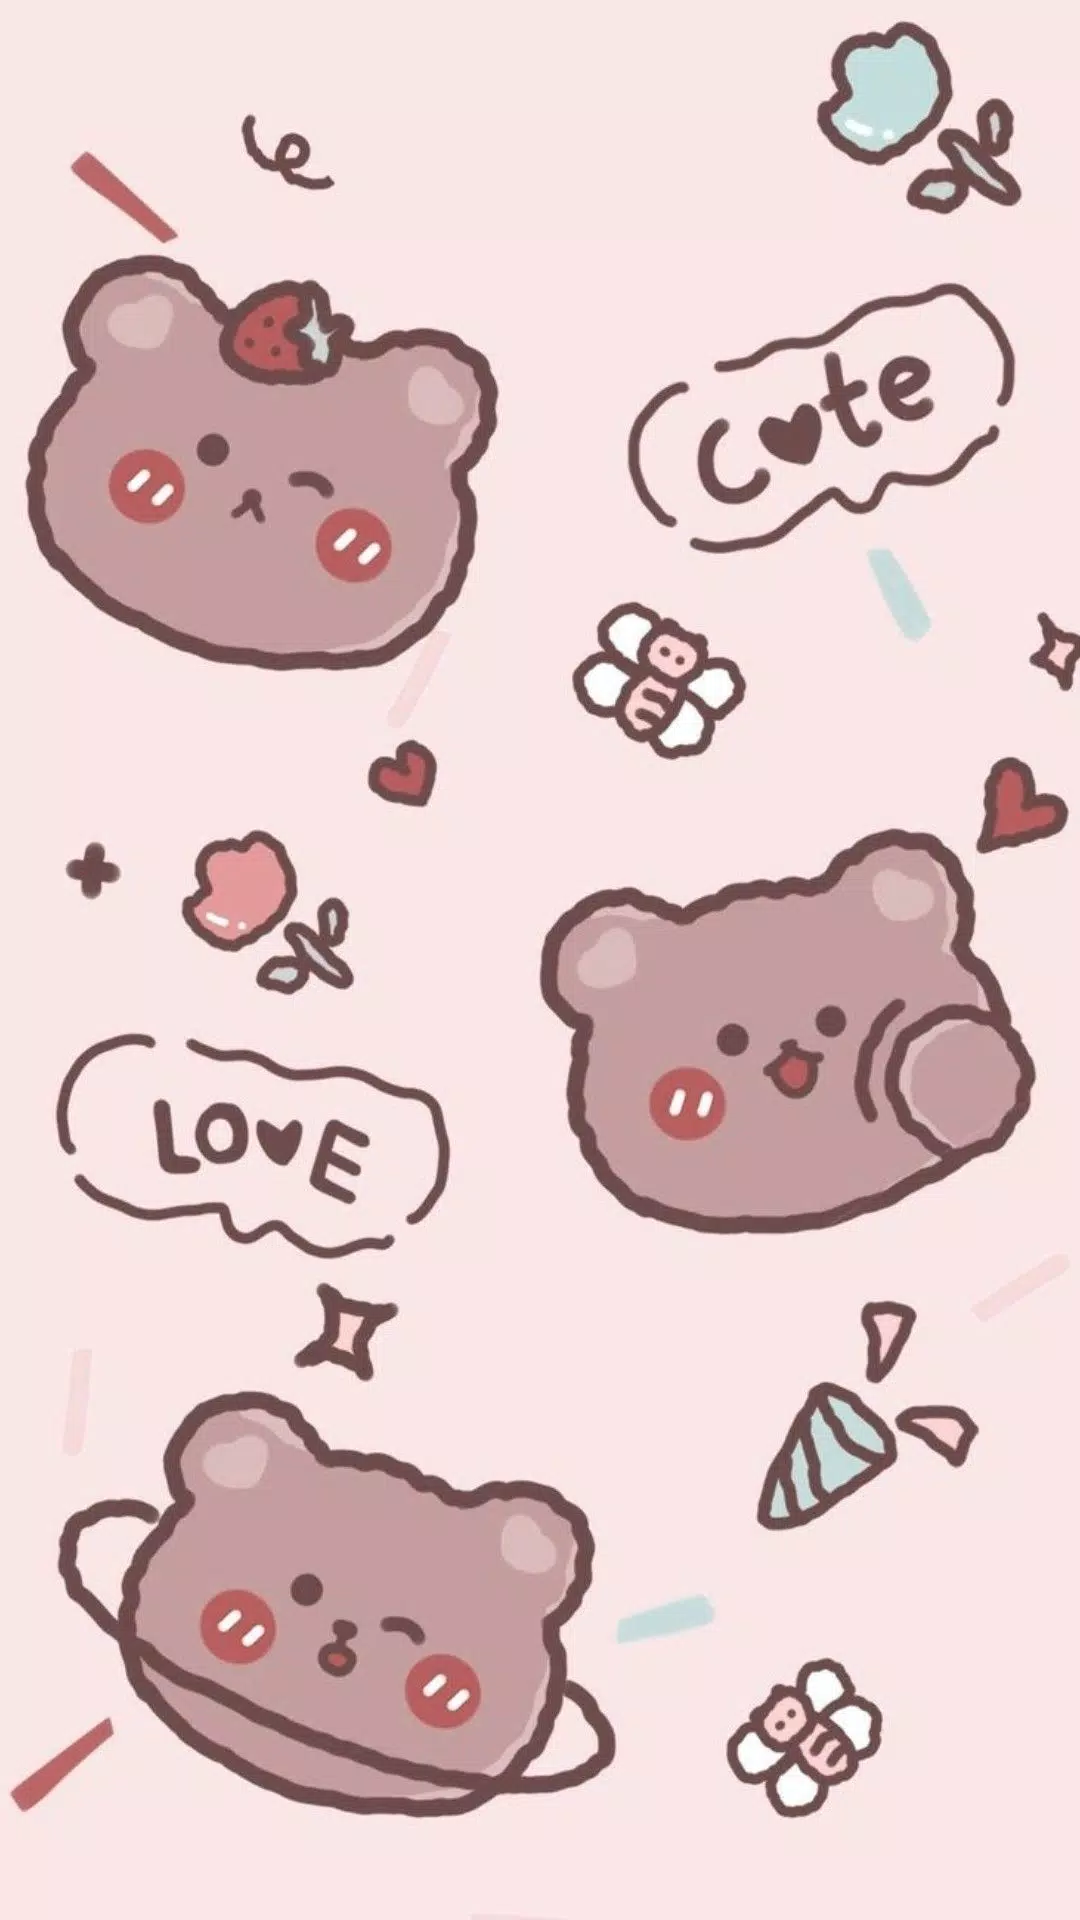 Kawaii Aesthetic Wallpaper APK for Android Download